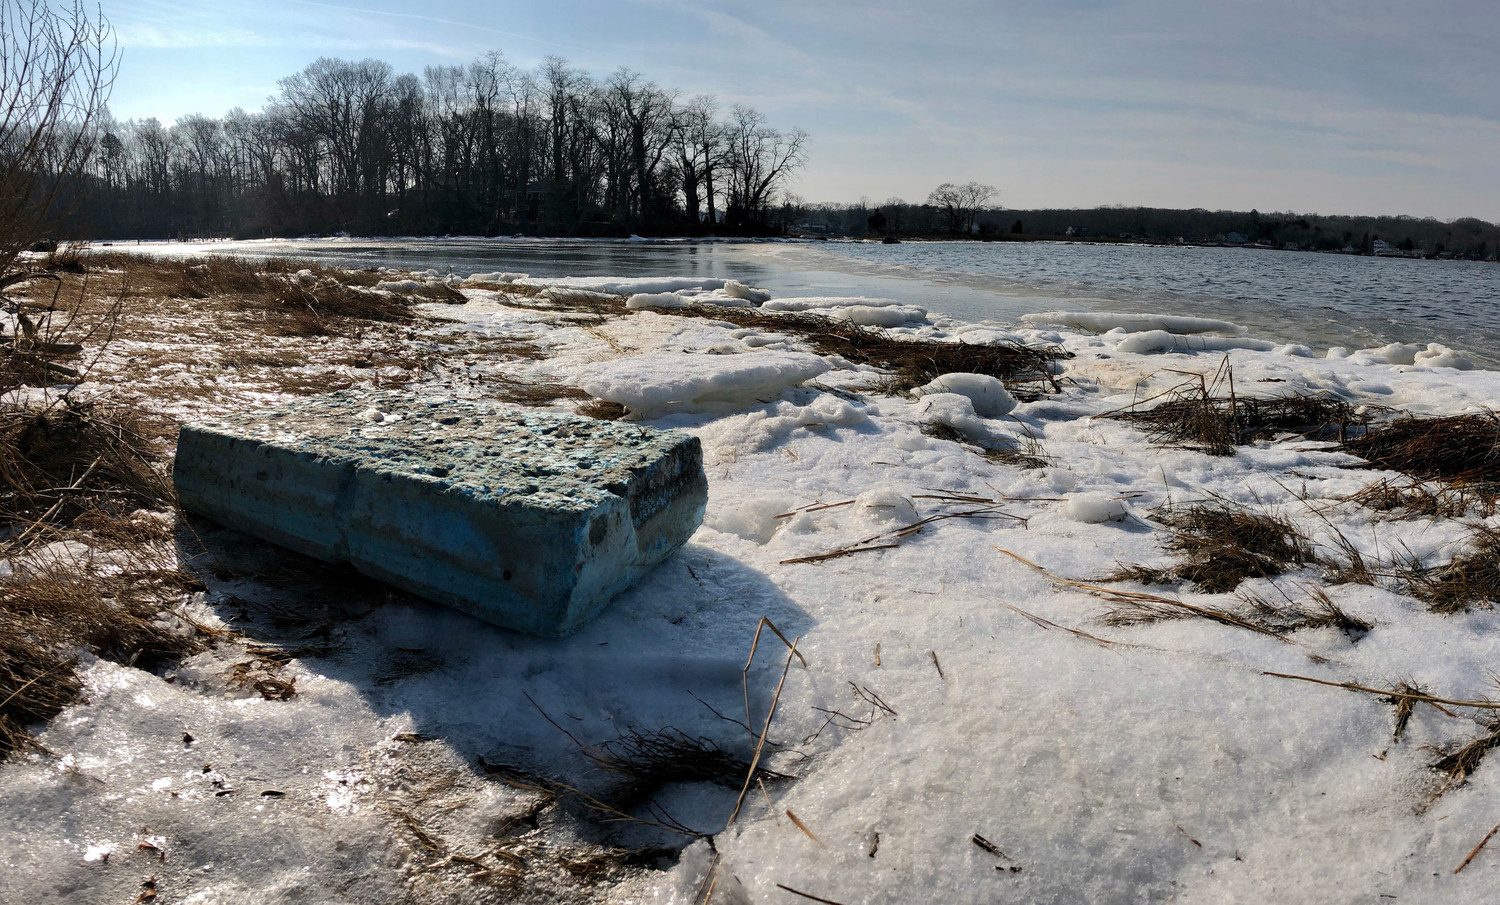 Fred Massie hopes Save The Bay and the state will help eradiate blue marine foam like this large piece, spotted washed up on the shore of the Touisset Marsh Wildlife Refuge in Warren Friday.